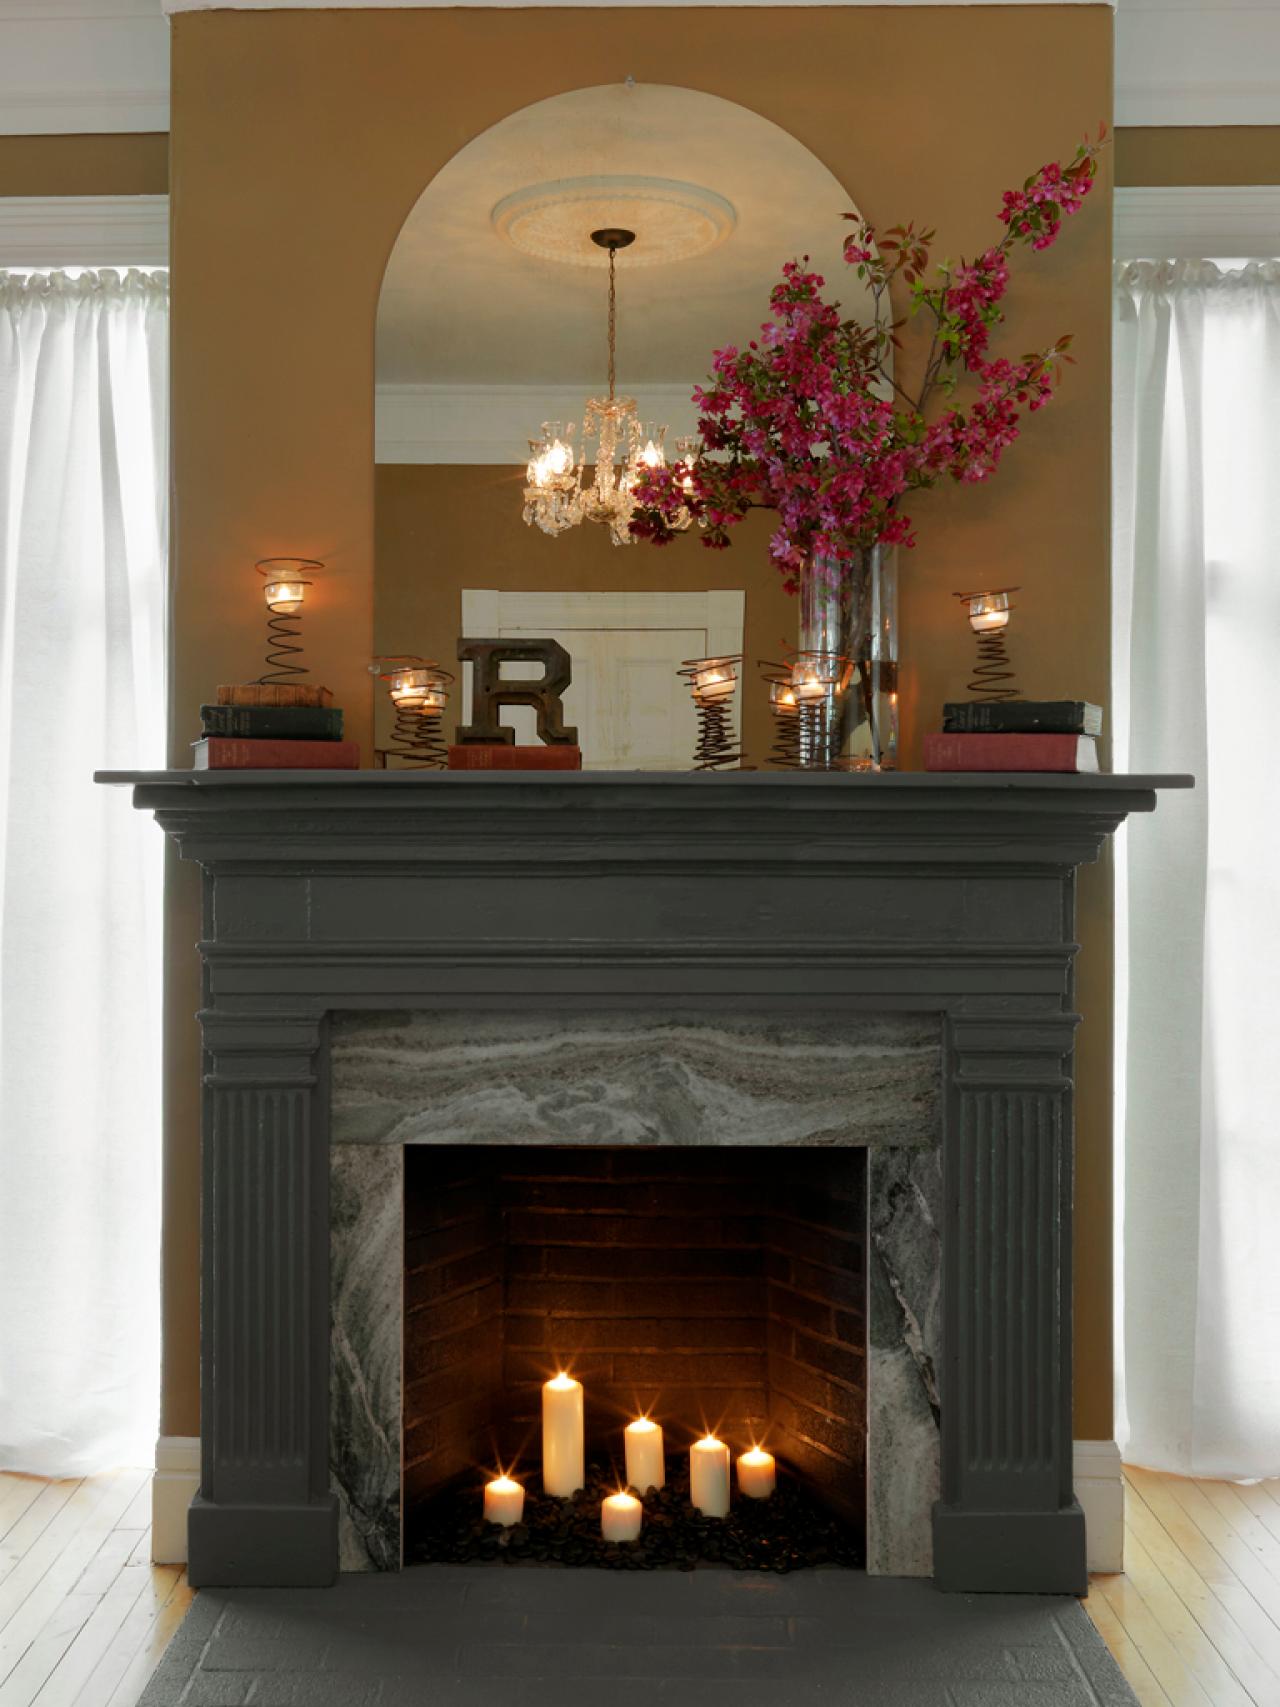 DIY Network has instructions on how to cover an old fireplace surround with marble and create a new mantel using an old door frame and molding.